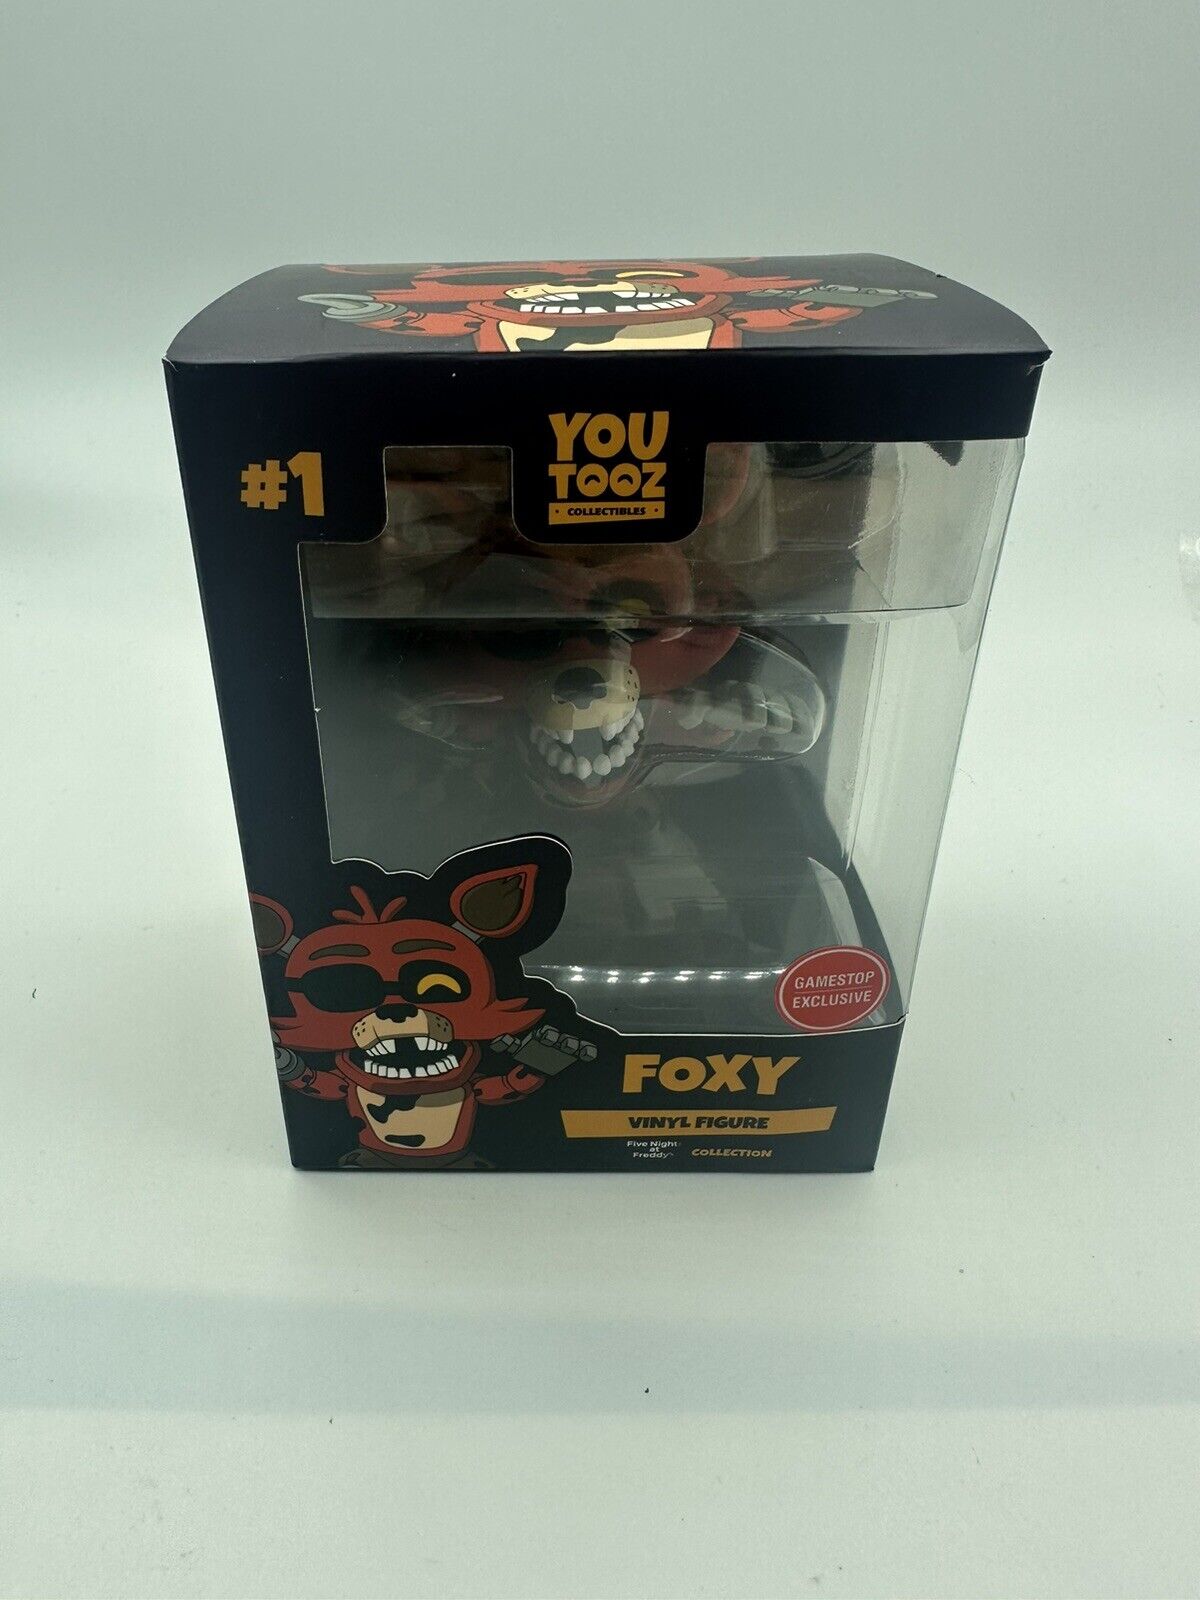 Youtooz: Five Nights at Freddy's Collection - Foxy Vinyl Figure GameStop 